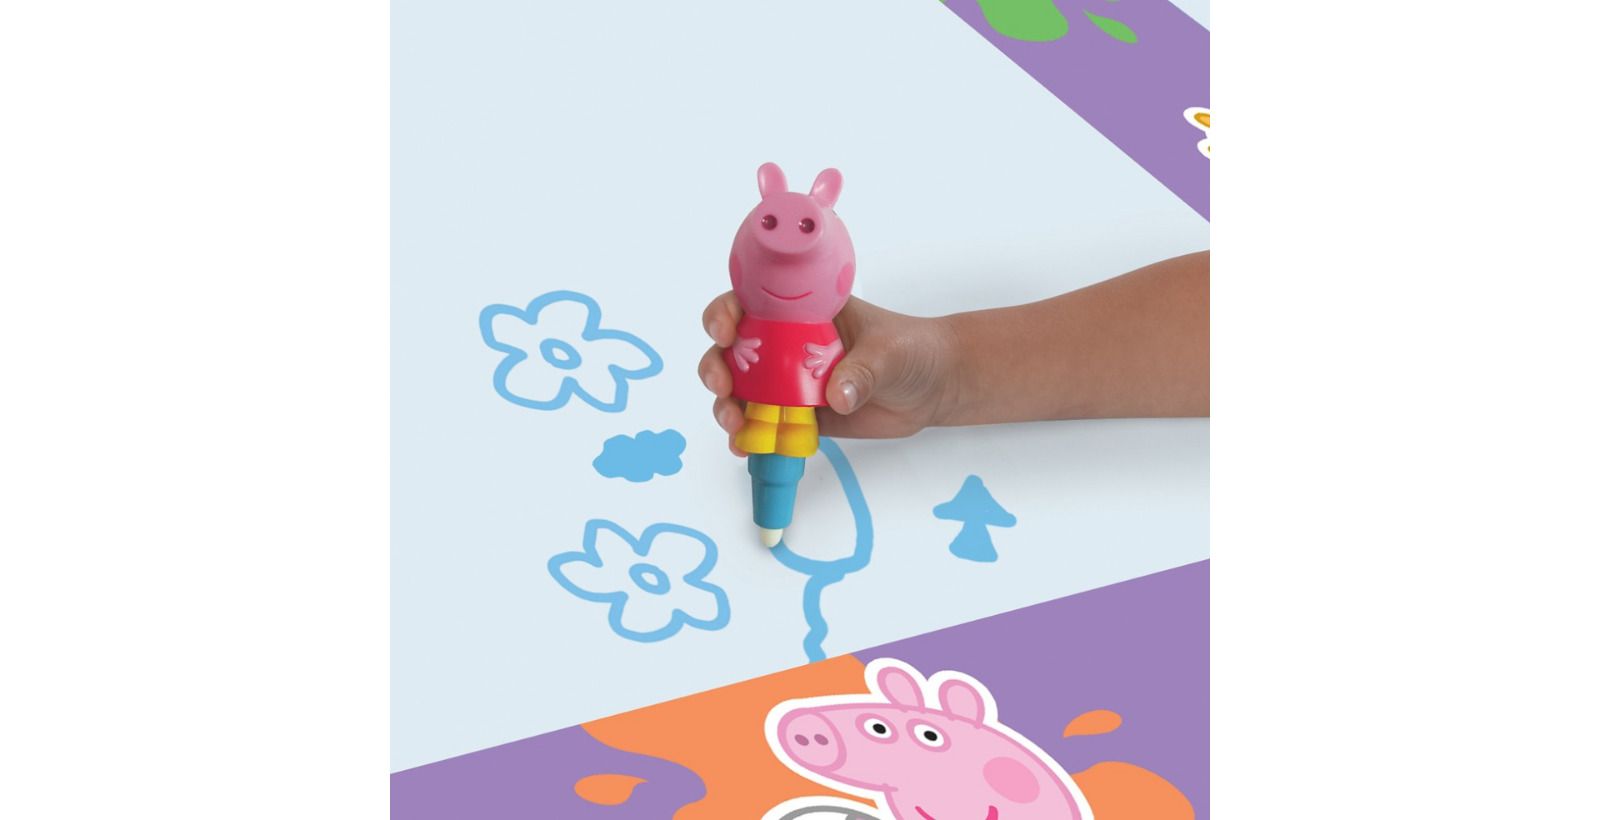 Aquadoodle Peppa Pig Mat: Allows no mess drawing by using water to create  fun 5011666720343